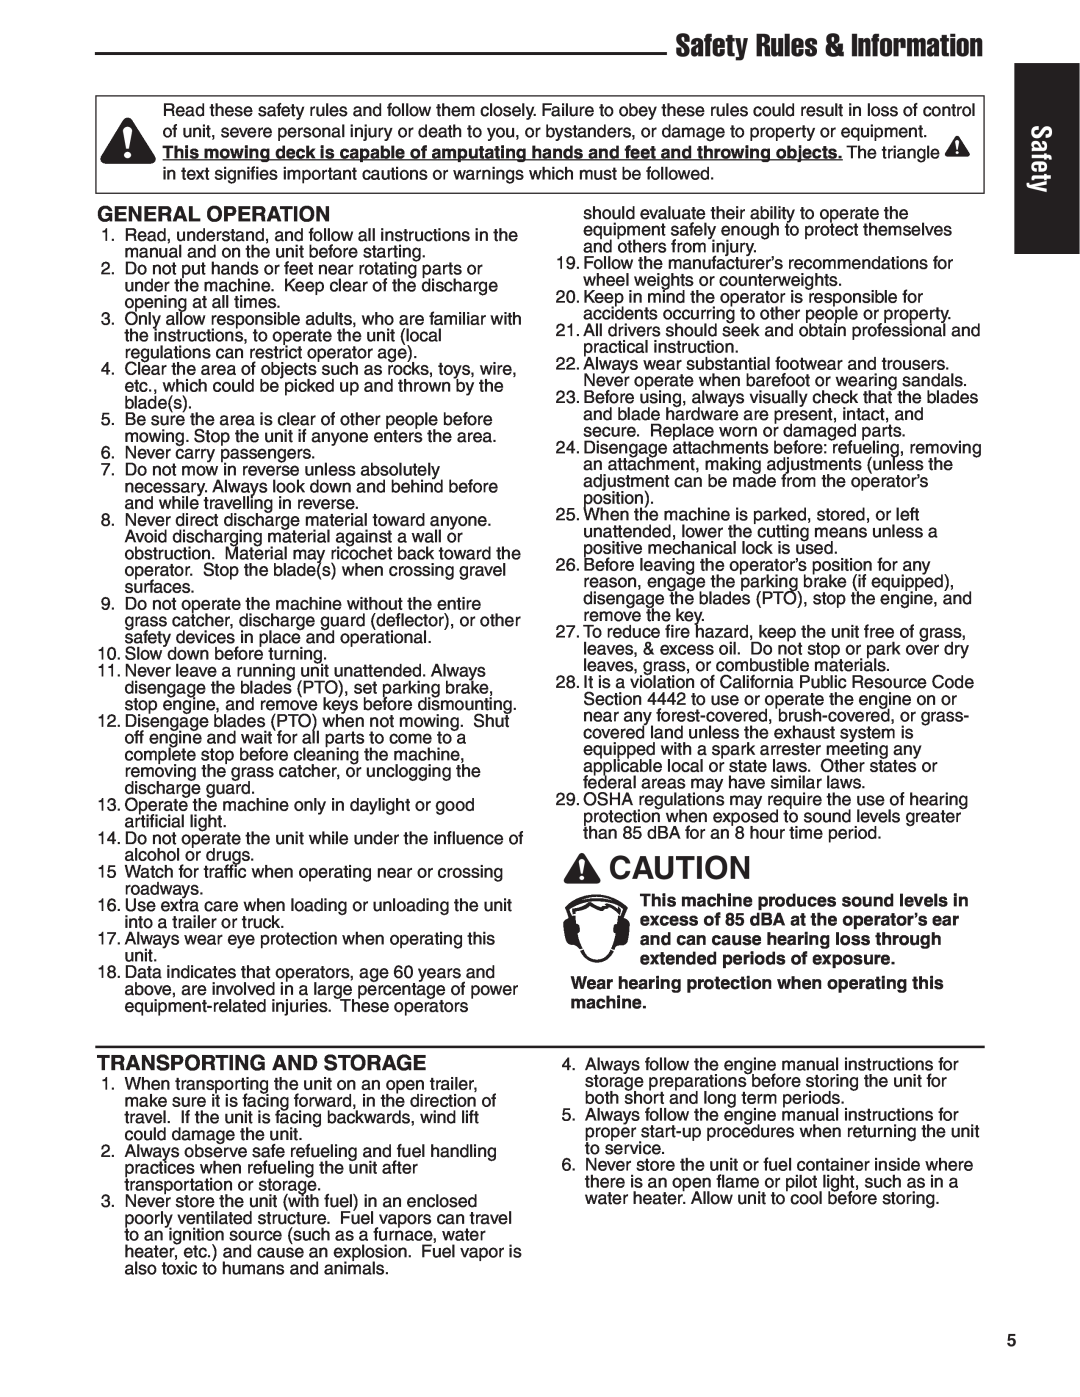 Simplicity 24HP manual Safety Rules & Information, General Operation, Transporting And Storage 